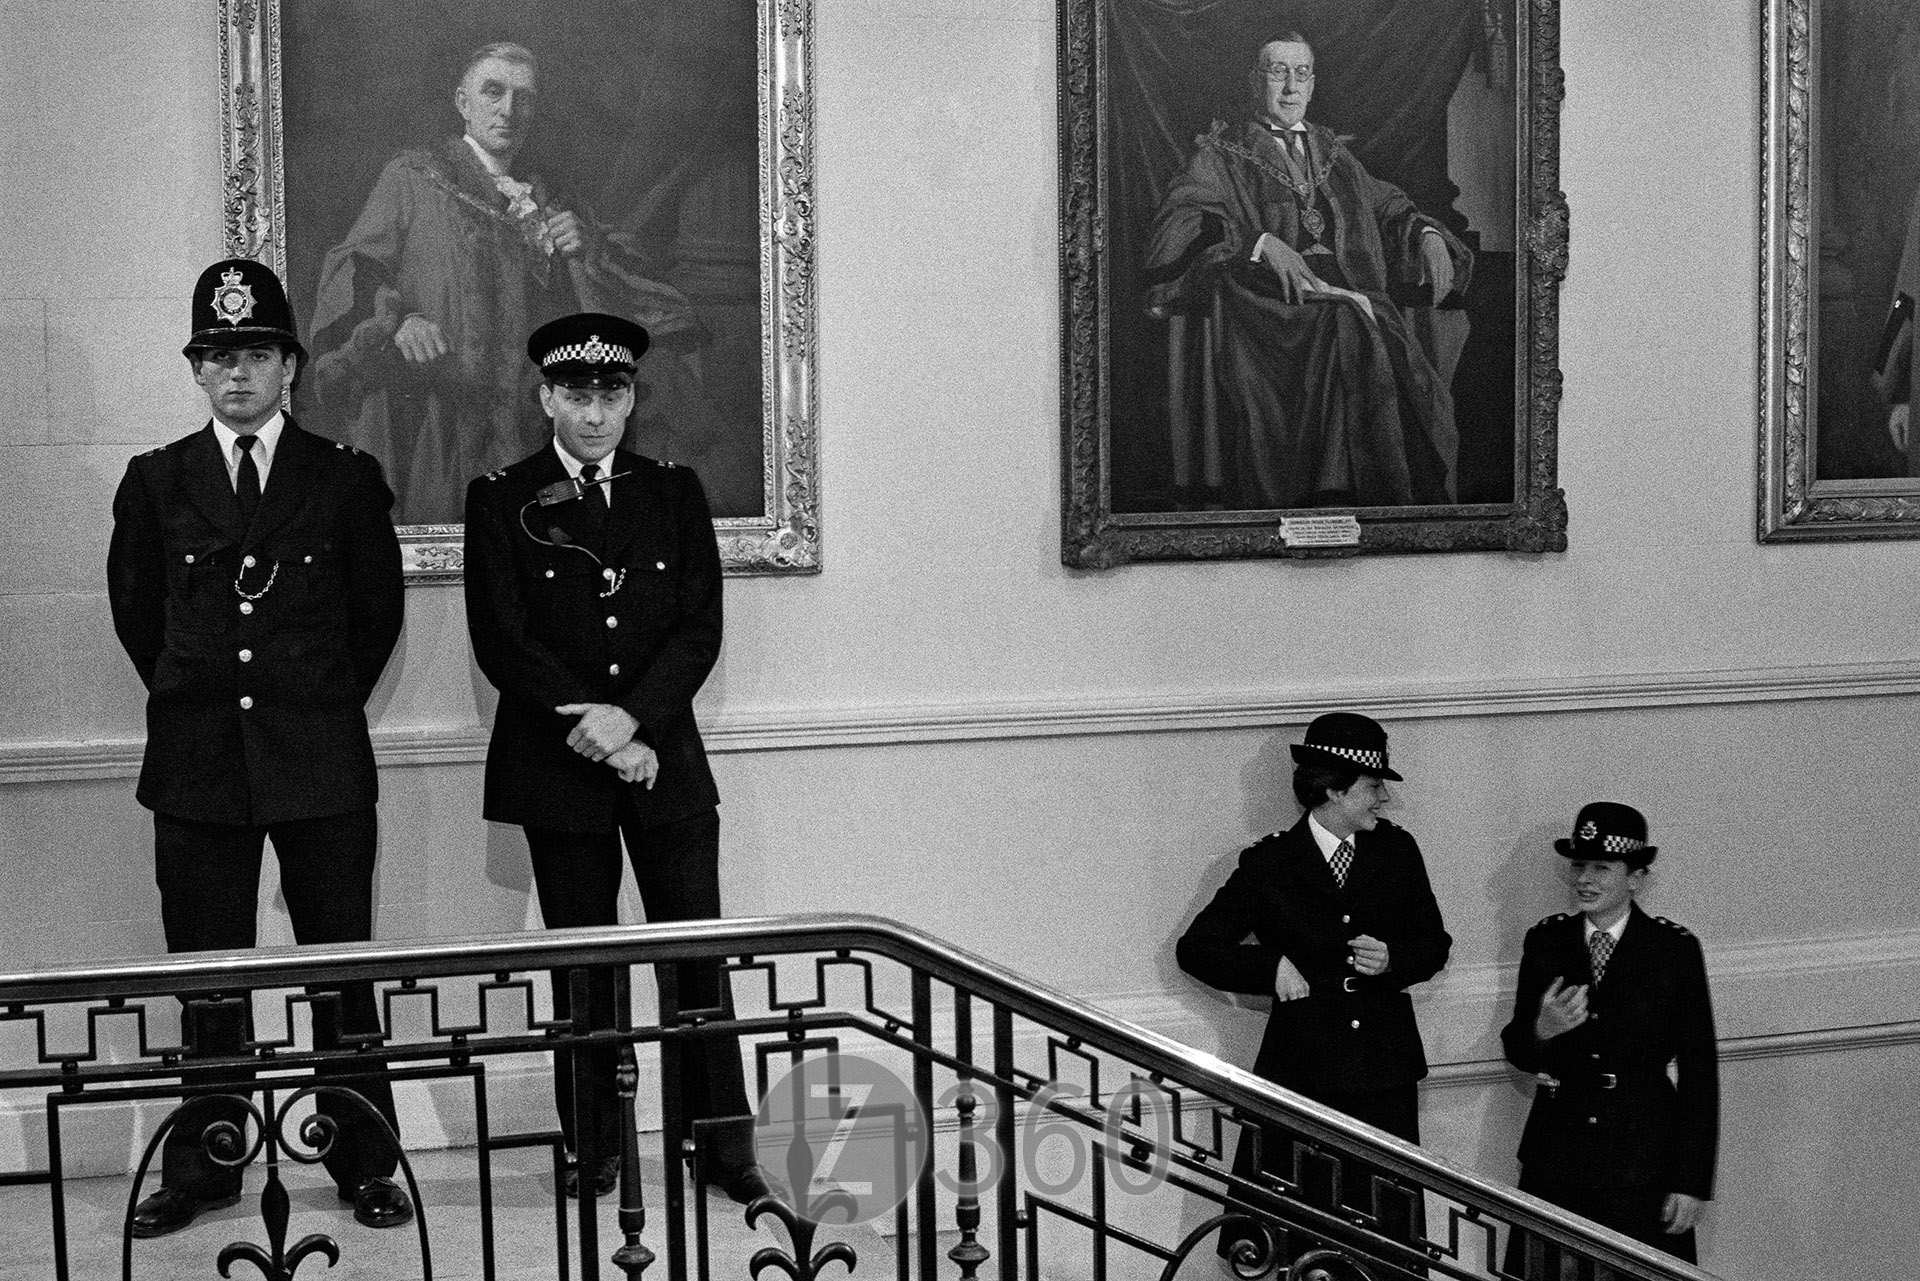 Police on the Stairs to the Chamber